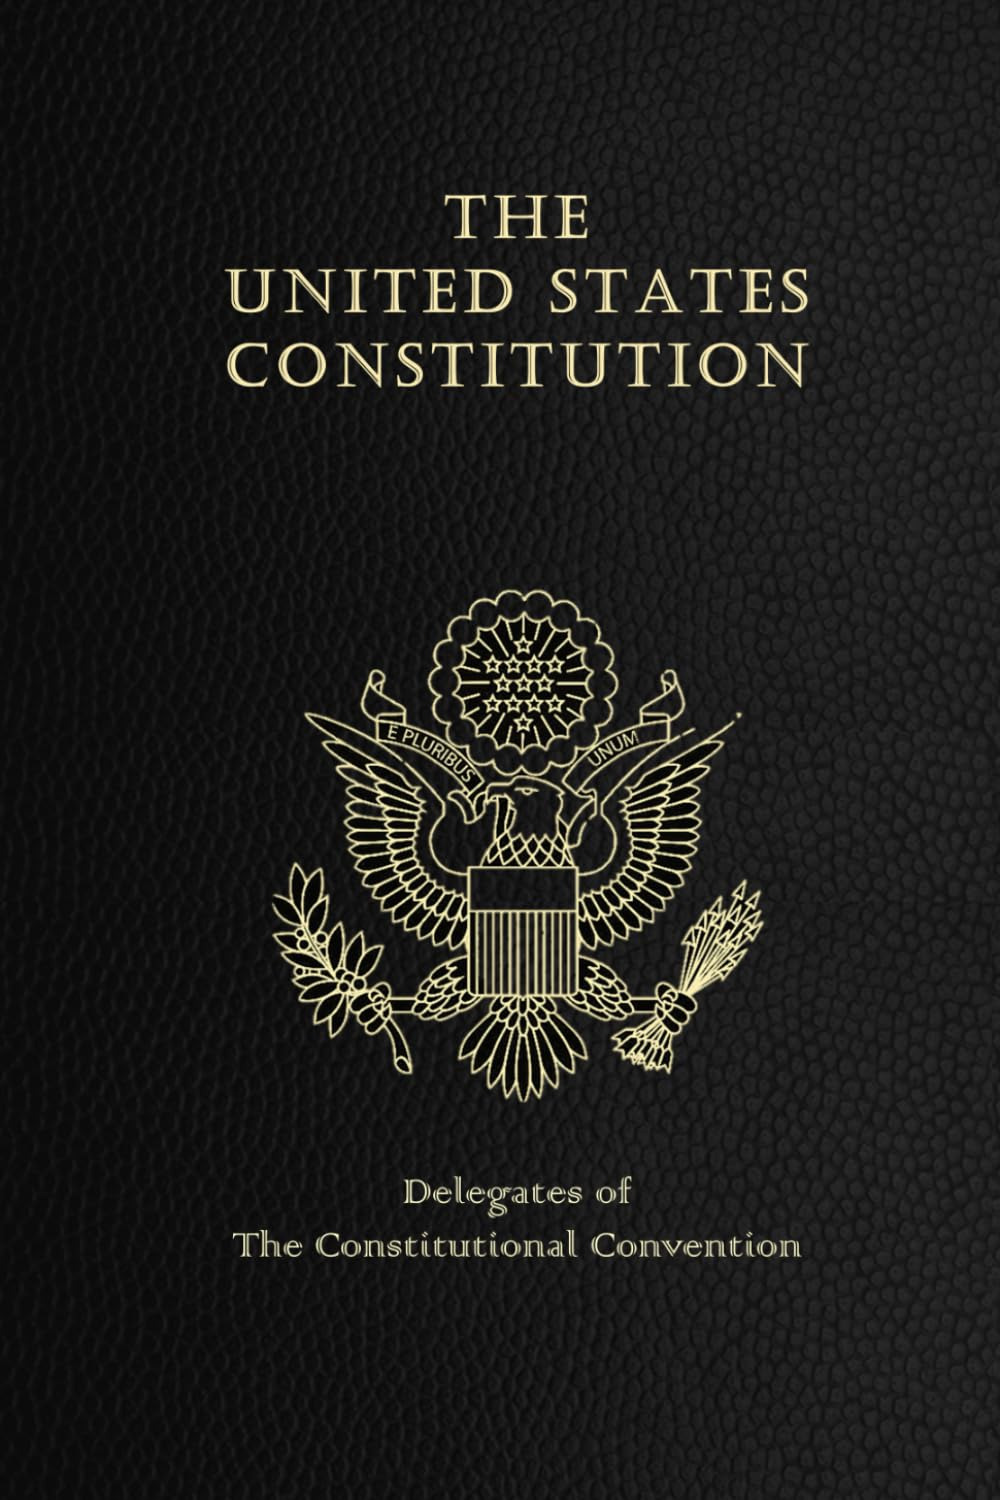 Constitution of the United States: US Constitution, Declaration of Indepen - NEW